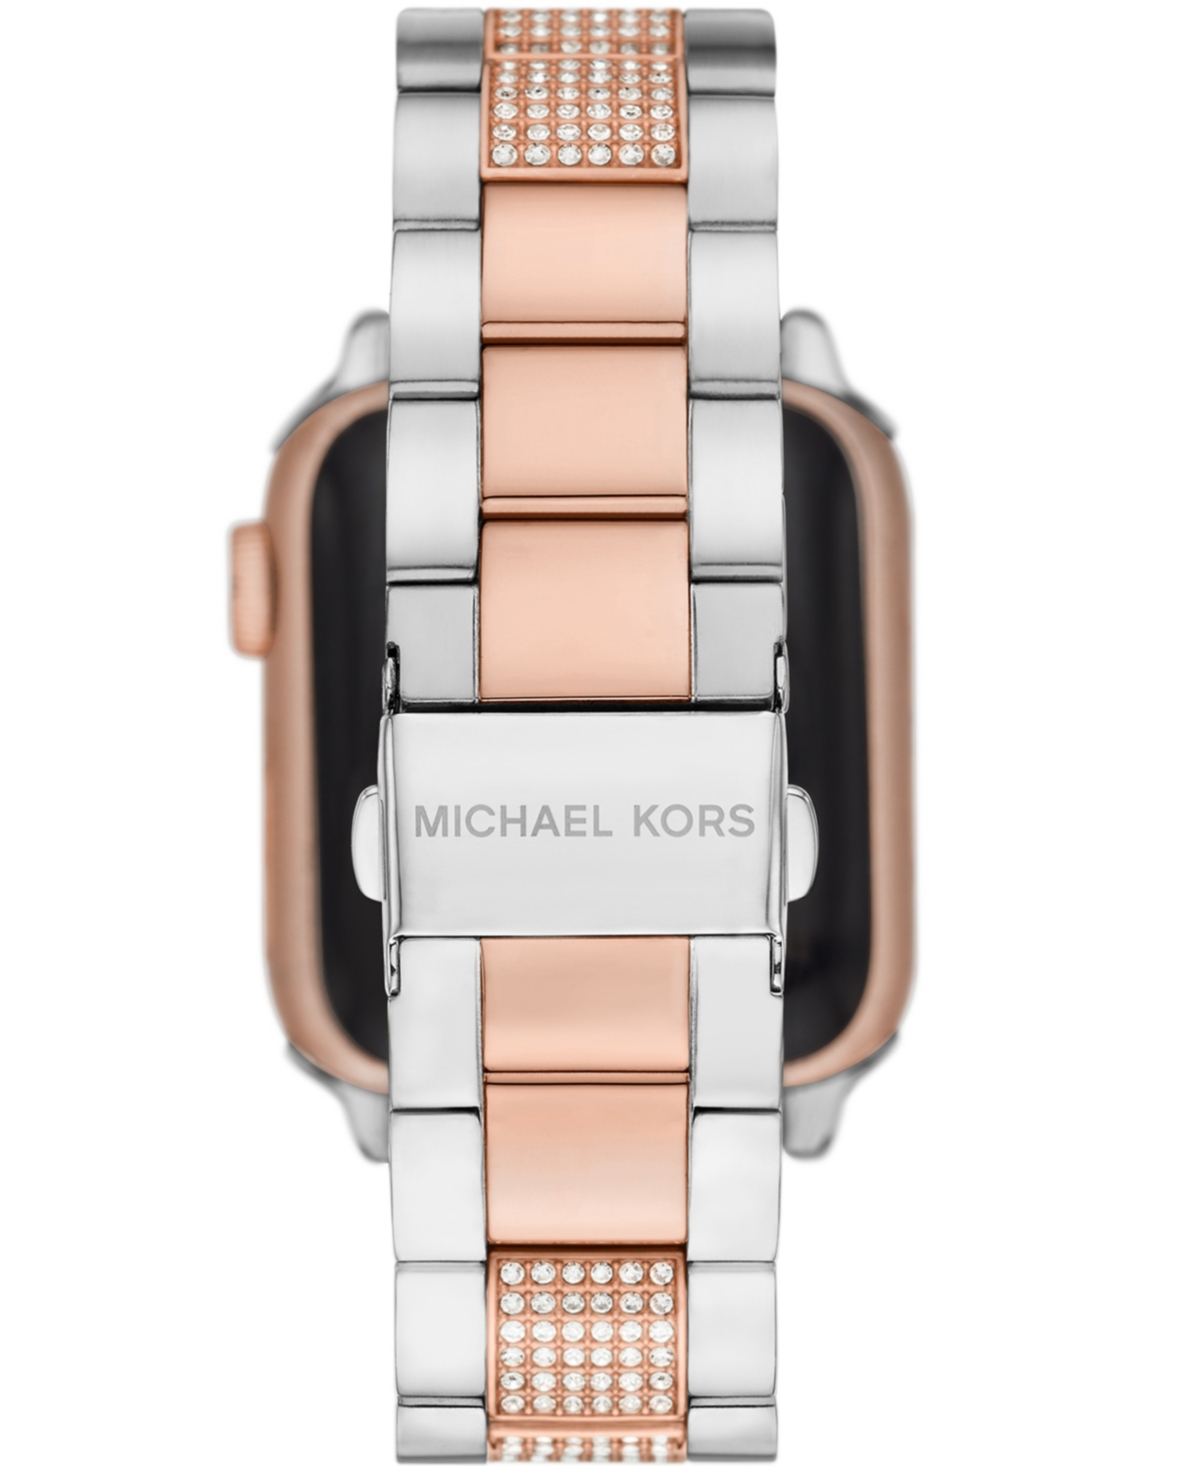 Shop Michael Kors Two-tone Stainless Steel 38/40mm Bracelet Band For Apple Watch In Two Tone